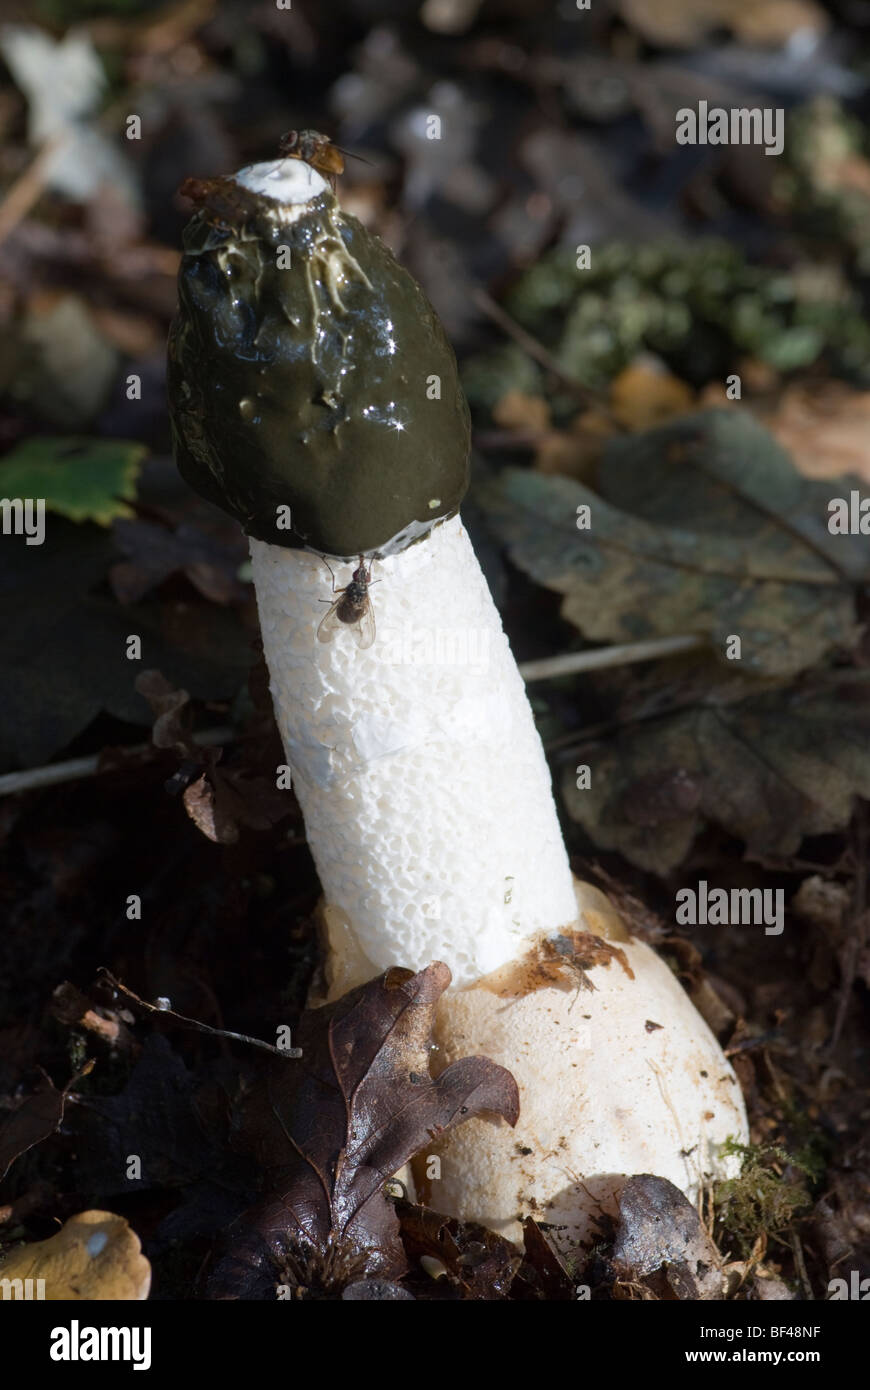 The common stinkhorn fungus (Phallus impudicus) the smell given off attracting flies. Stock Photo